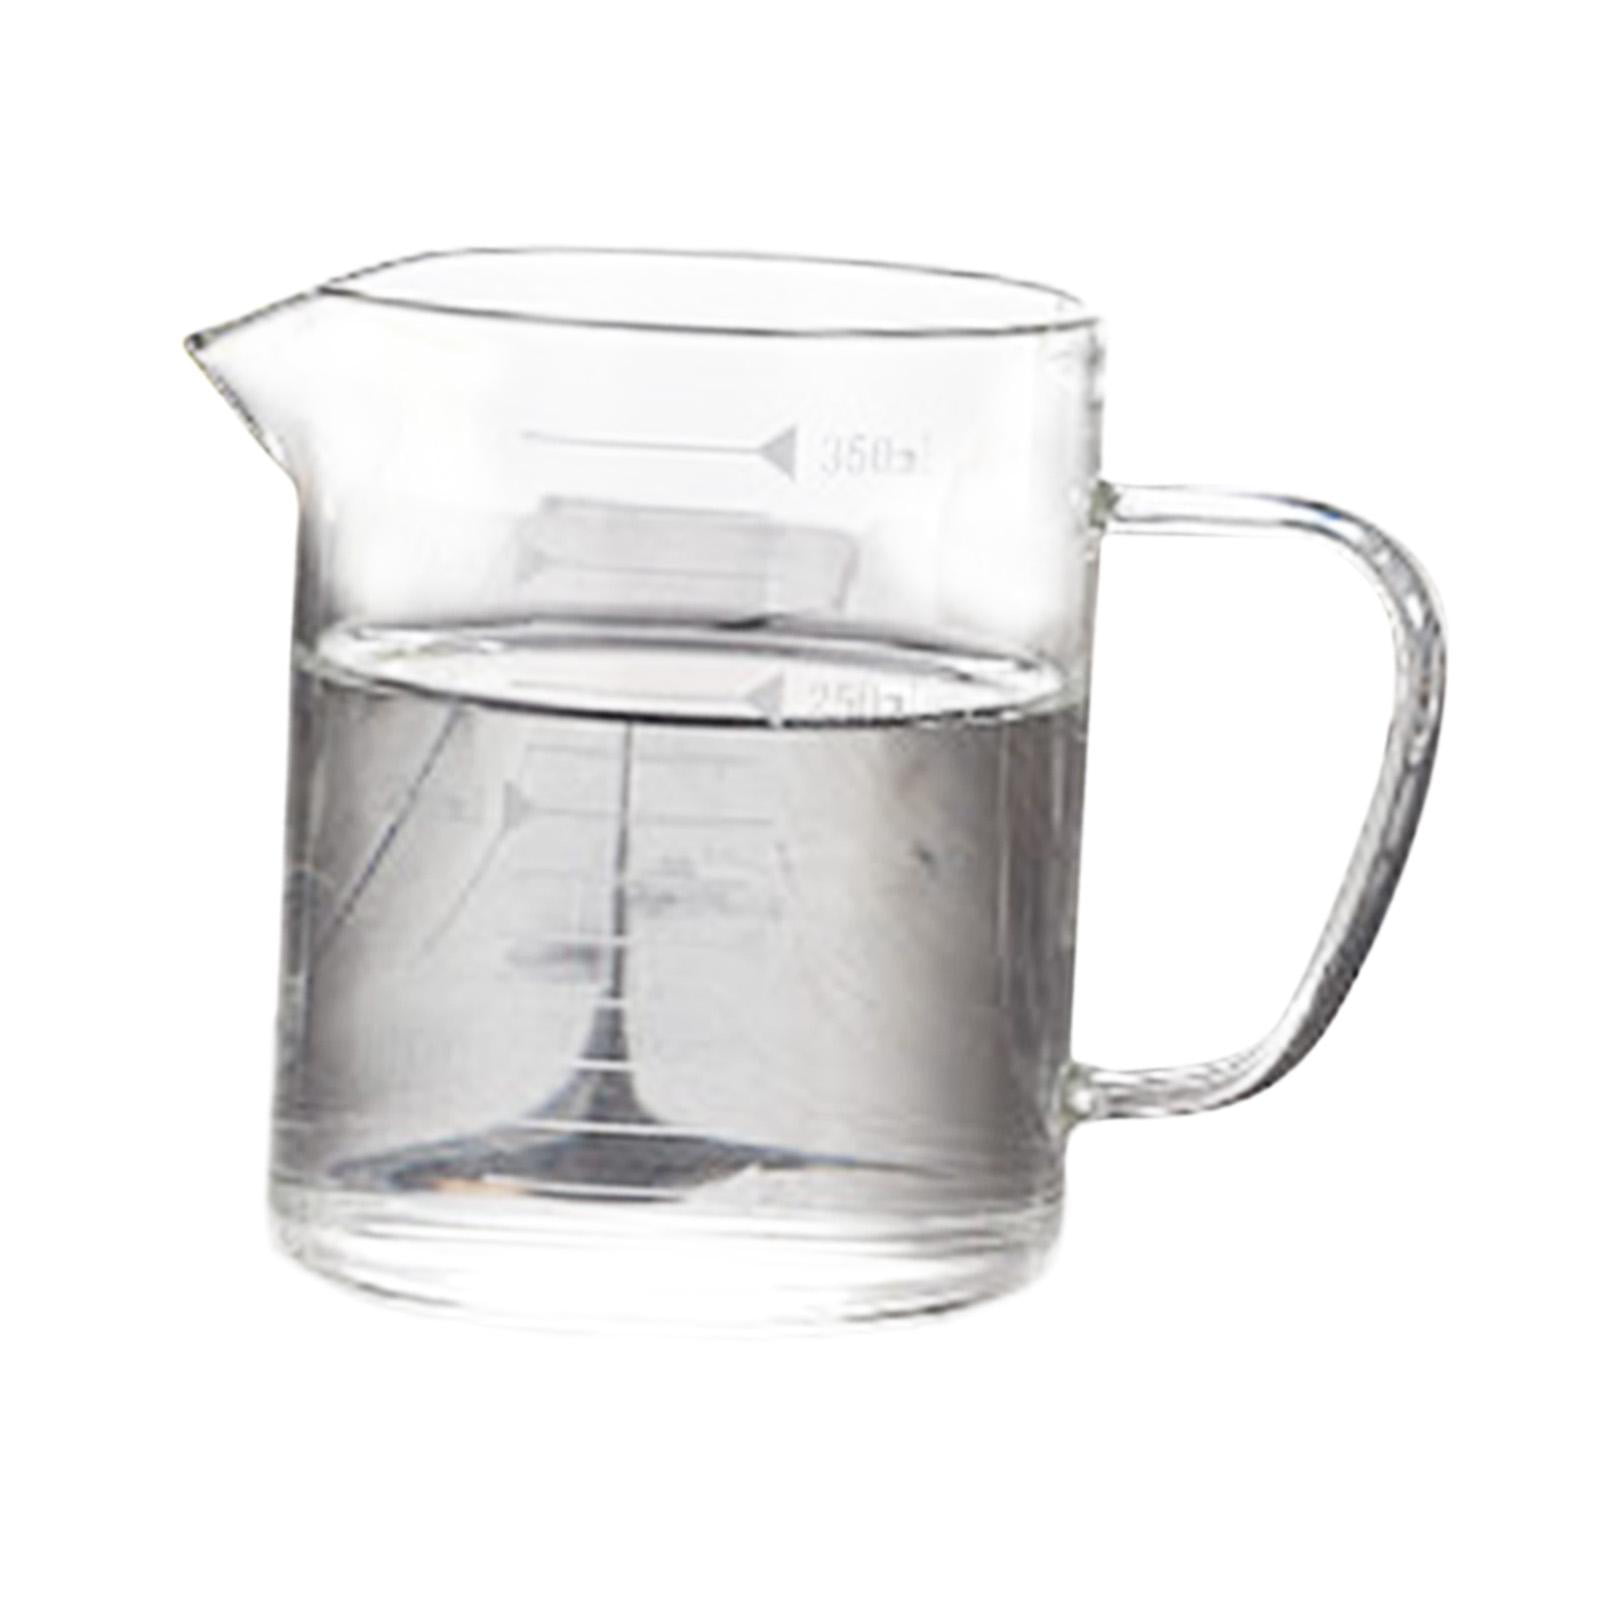 An Easier-to-Read Measuring Cup - Core77